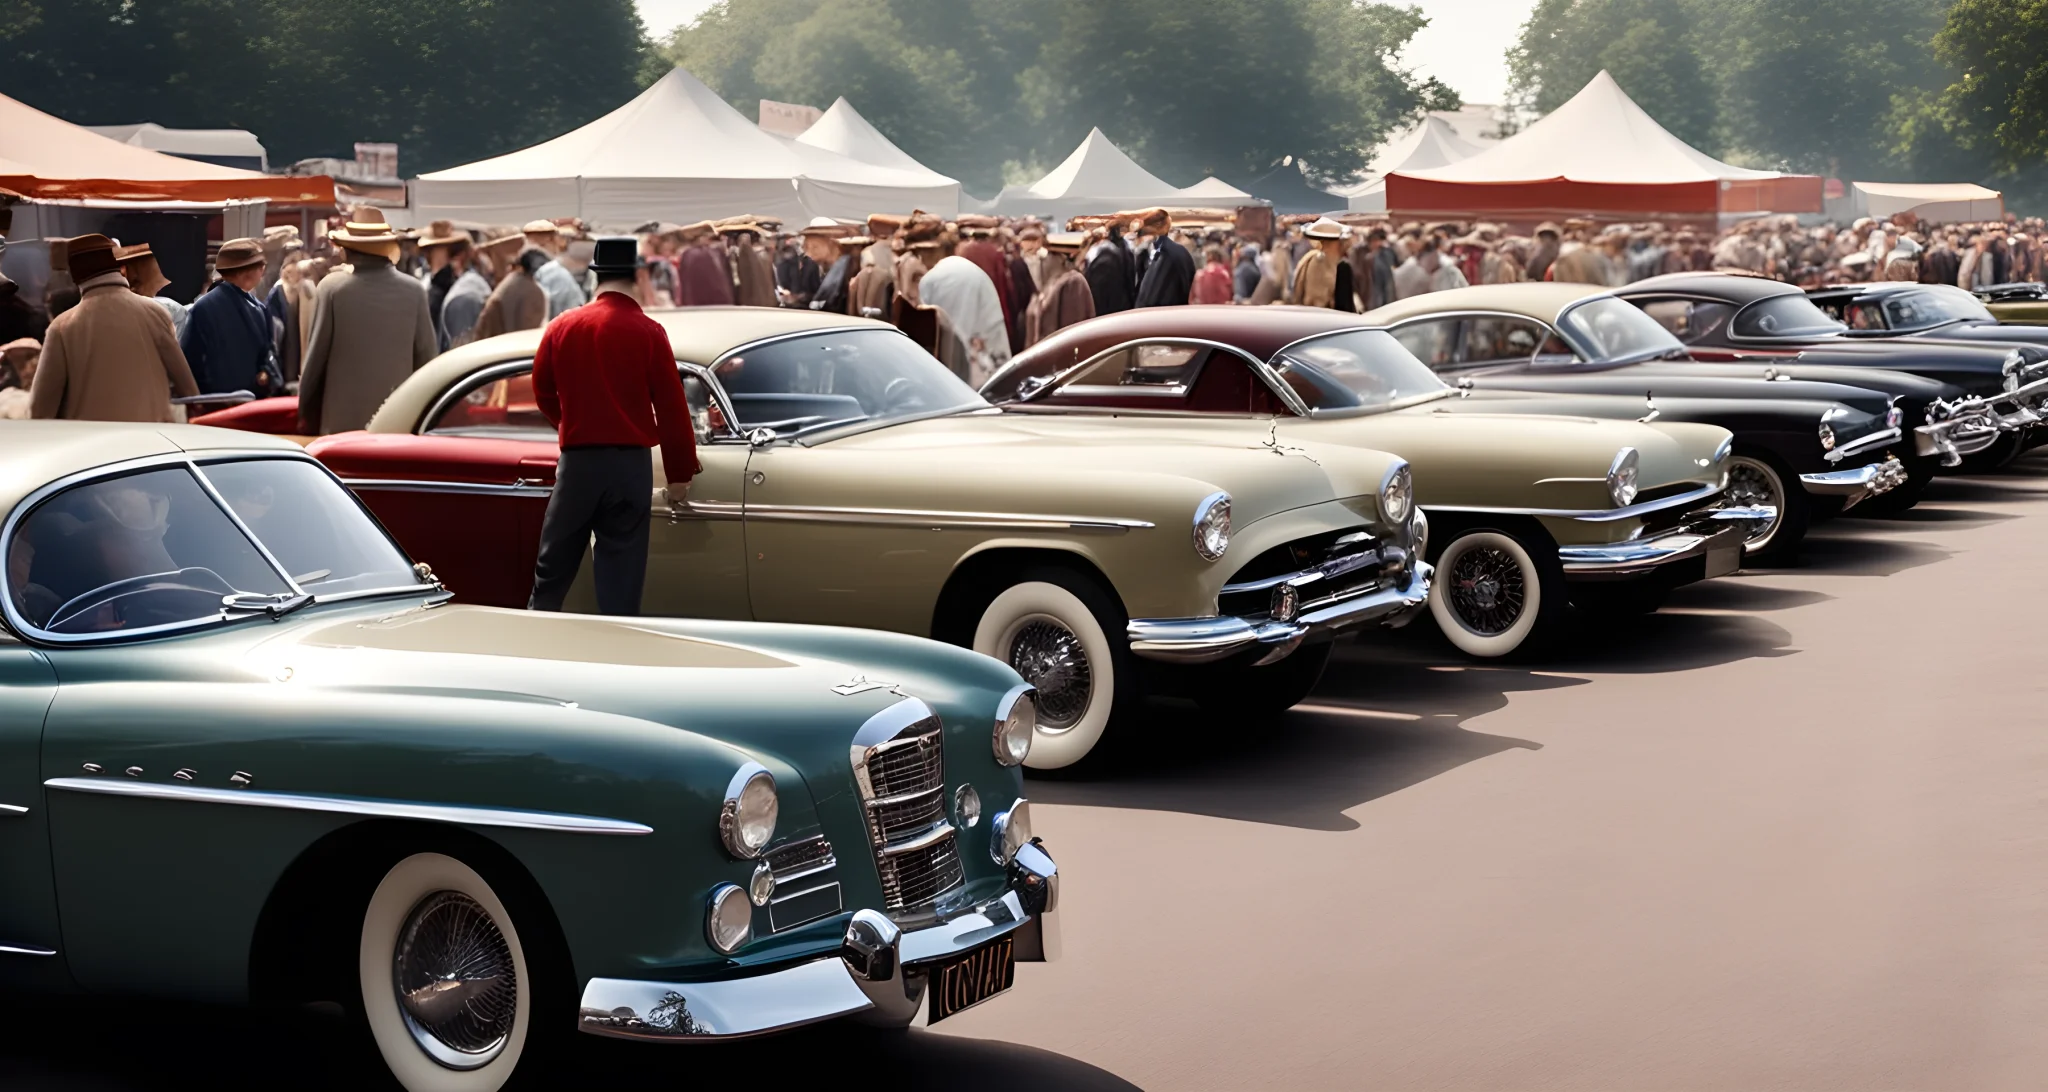 The image shows a lineup of vintage and luxury cars at a car show, with people milling around and admiring the vehicles.